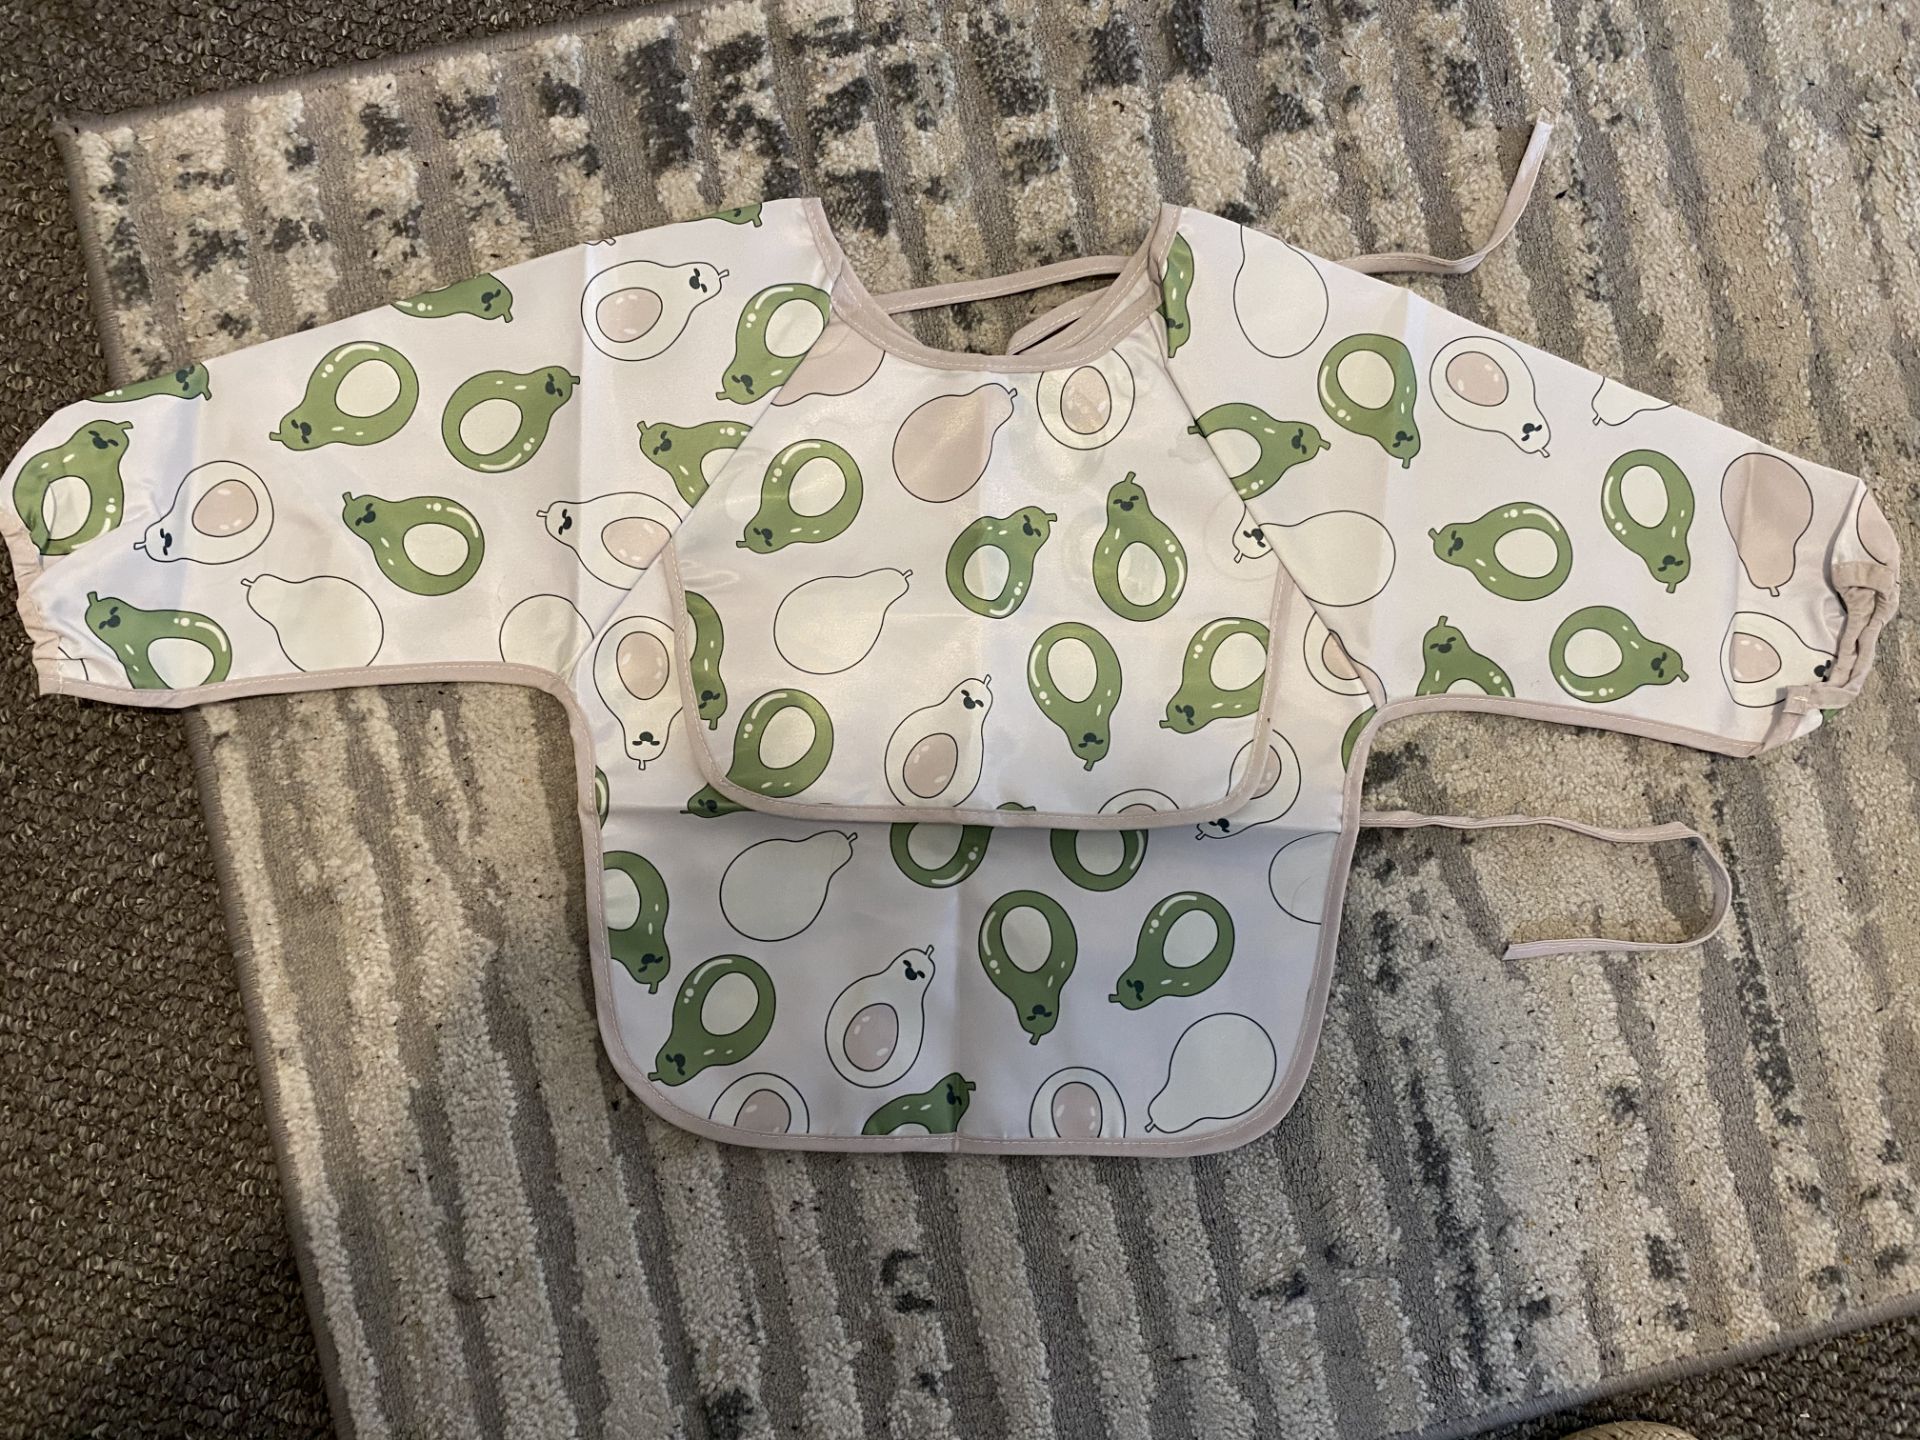 Approx. 200 x Baby Overall Weaning Bib's Sleeved Coverall Age 6-18 Months 2 Sizes